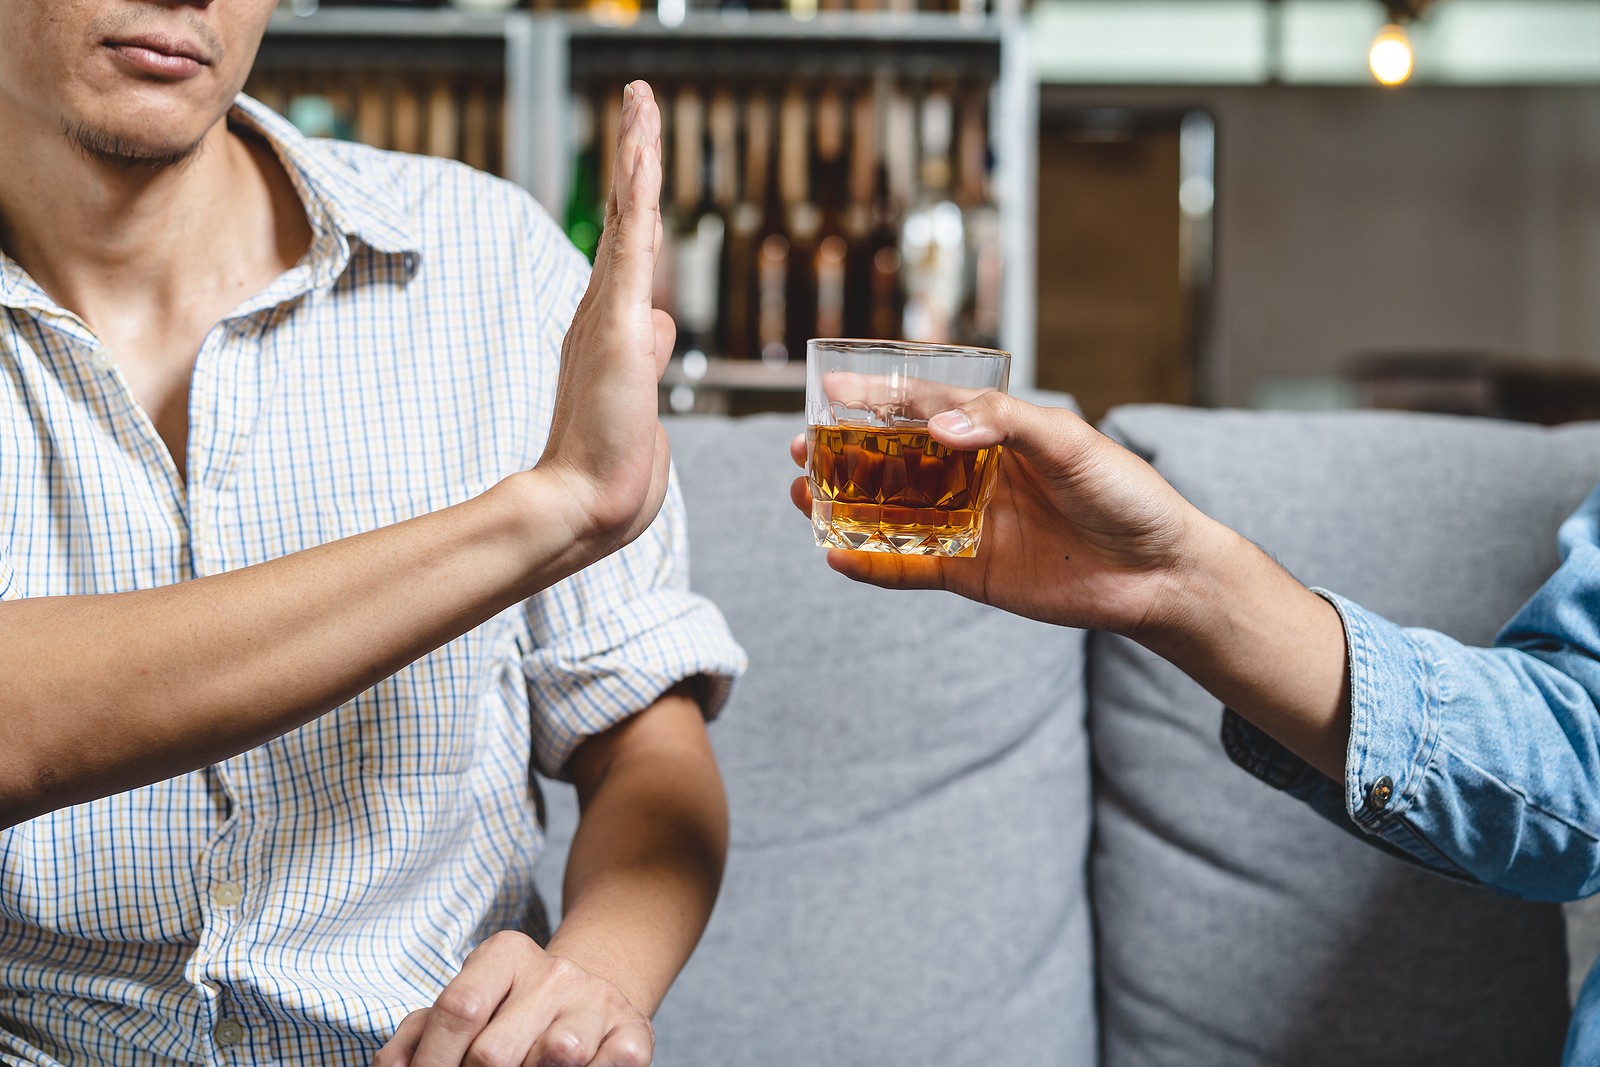 Man refuses alcoholic beverage being offered to him by friend.